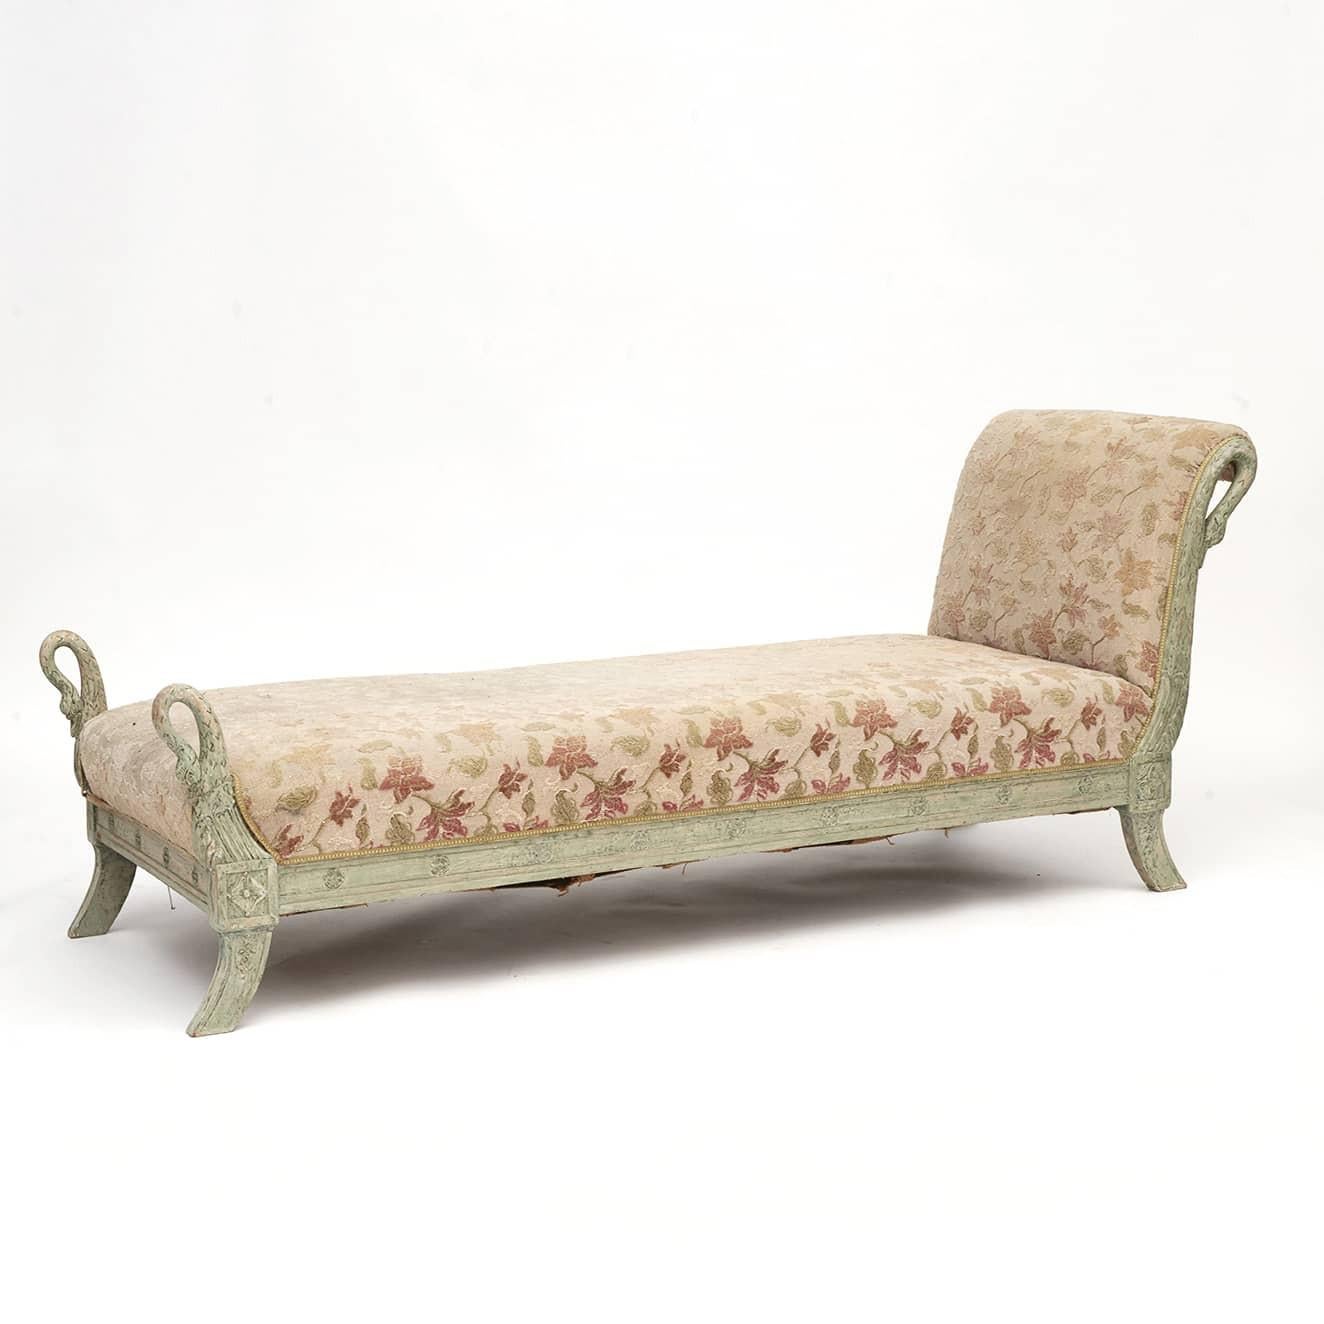 Neoclassical French swaneneck recamier.
Decorative and elegant made in beech wood with beautiful carving work. Scraped to original light green color.

France 1820 -1830.

NB:
Fabric on the mattress and back is worn and colures faded needs